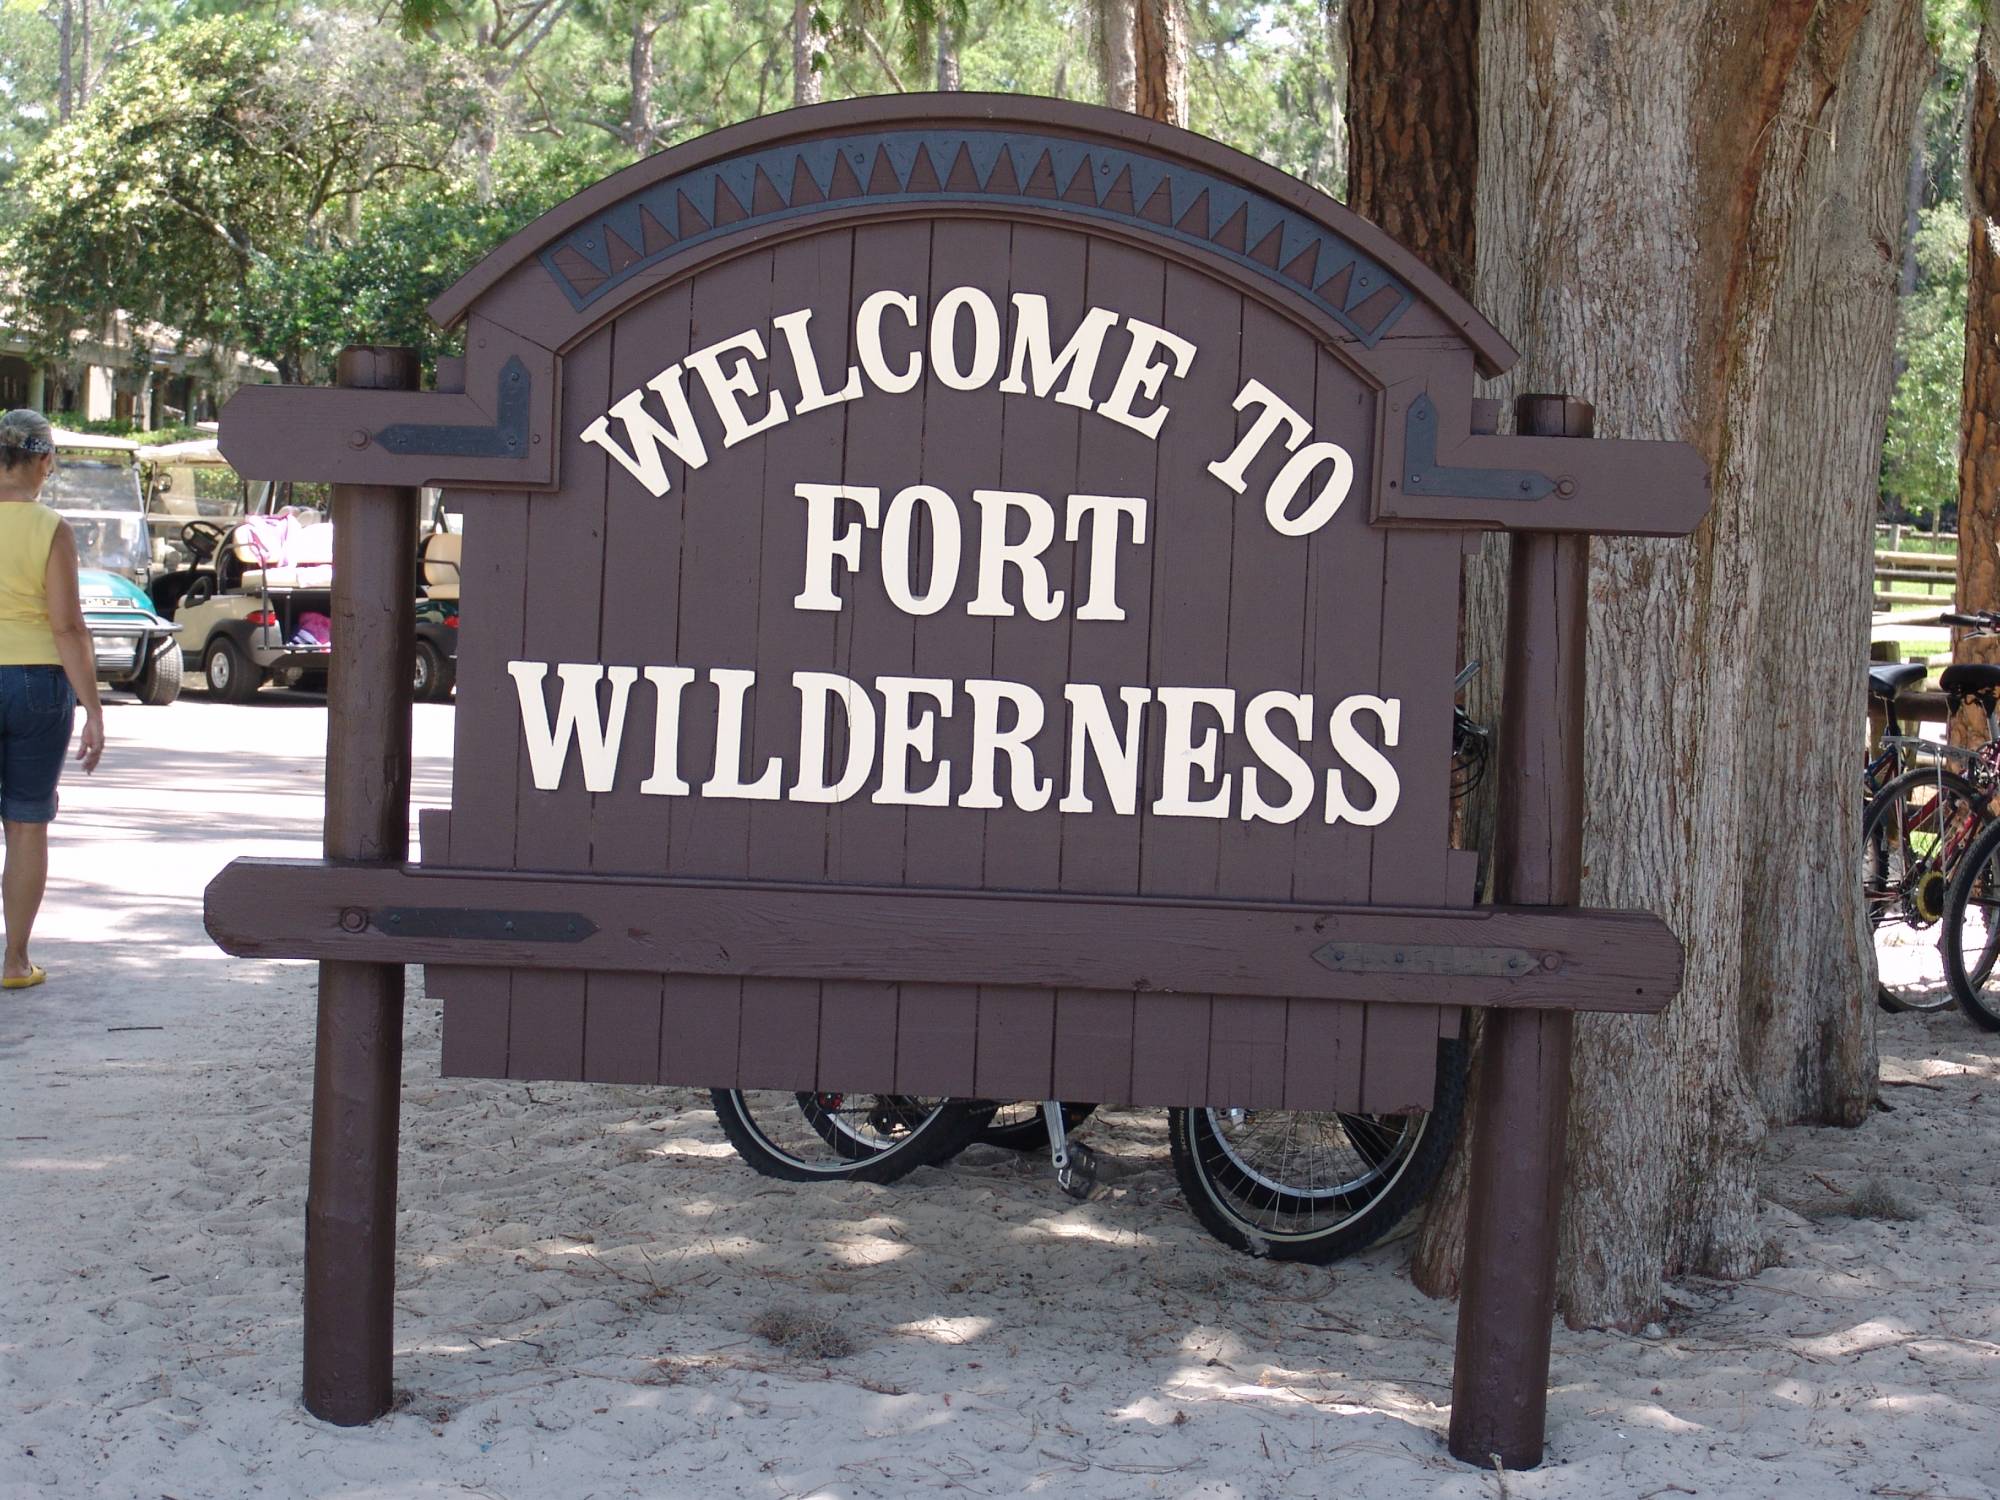 Fort Wilderness - welcome sign